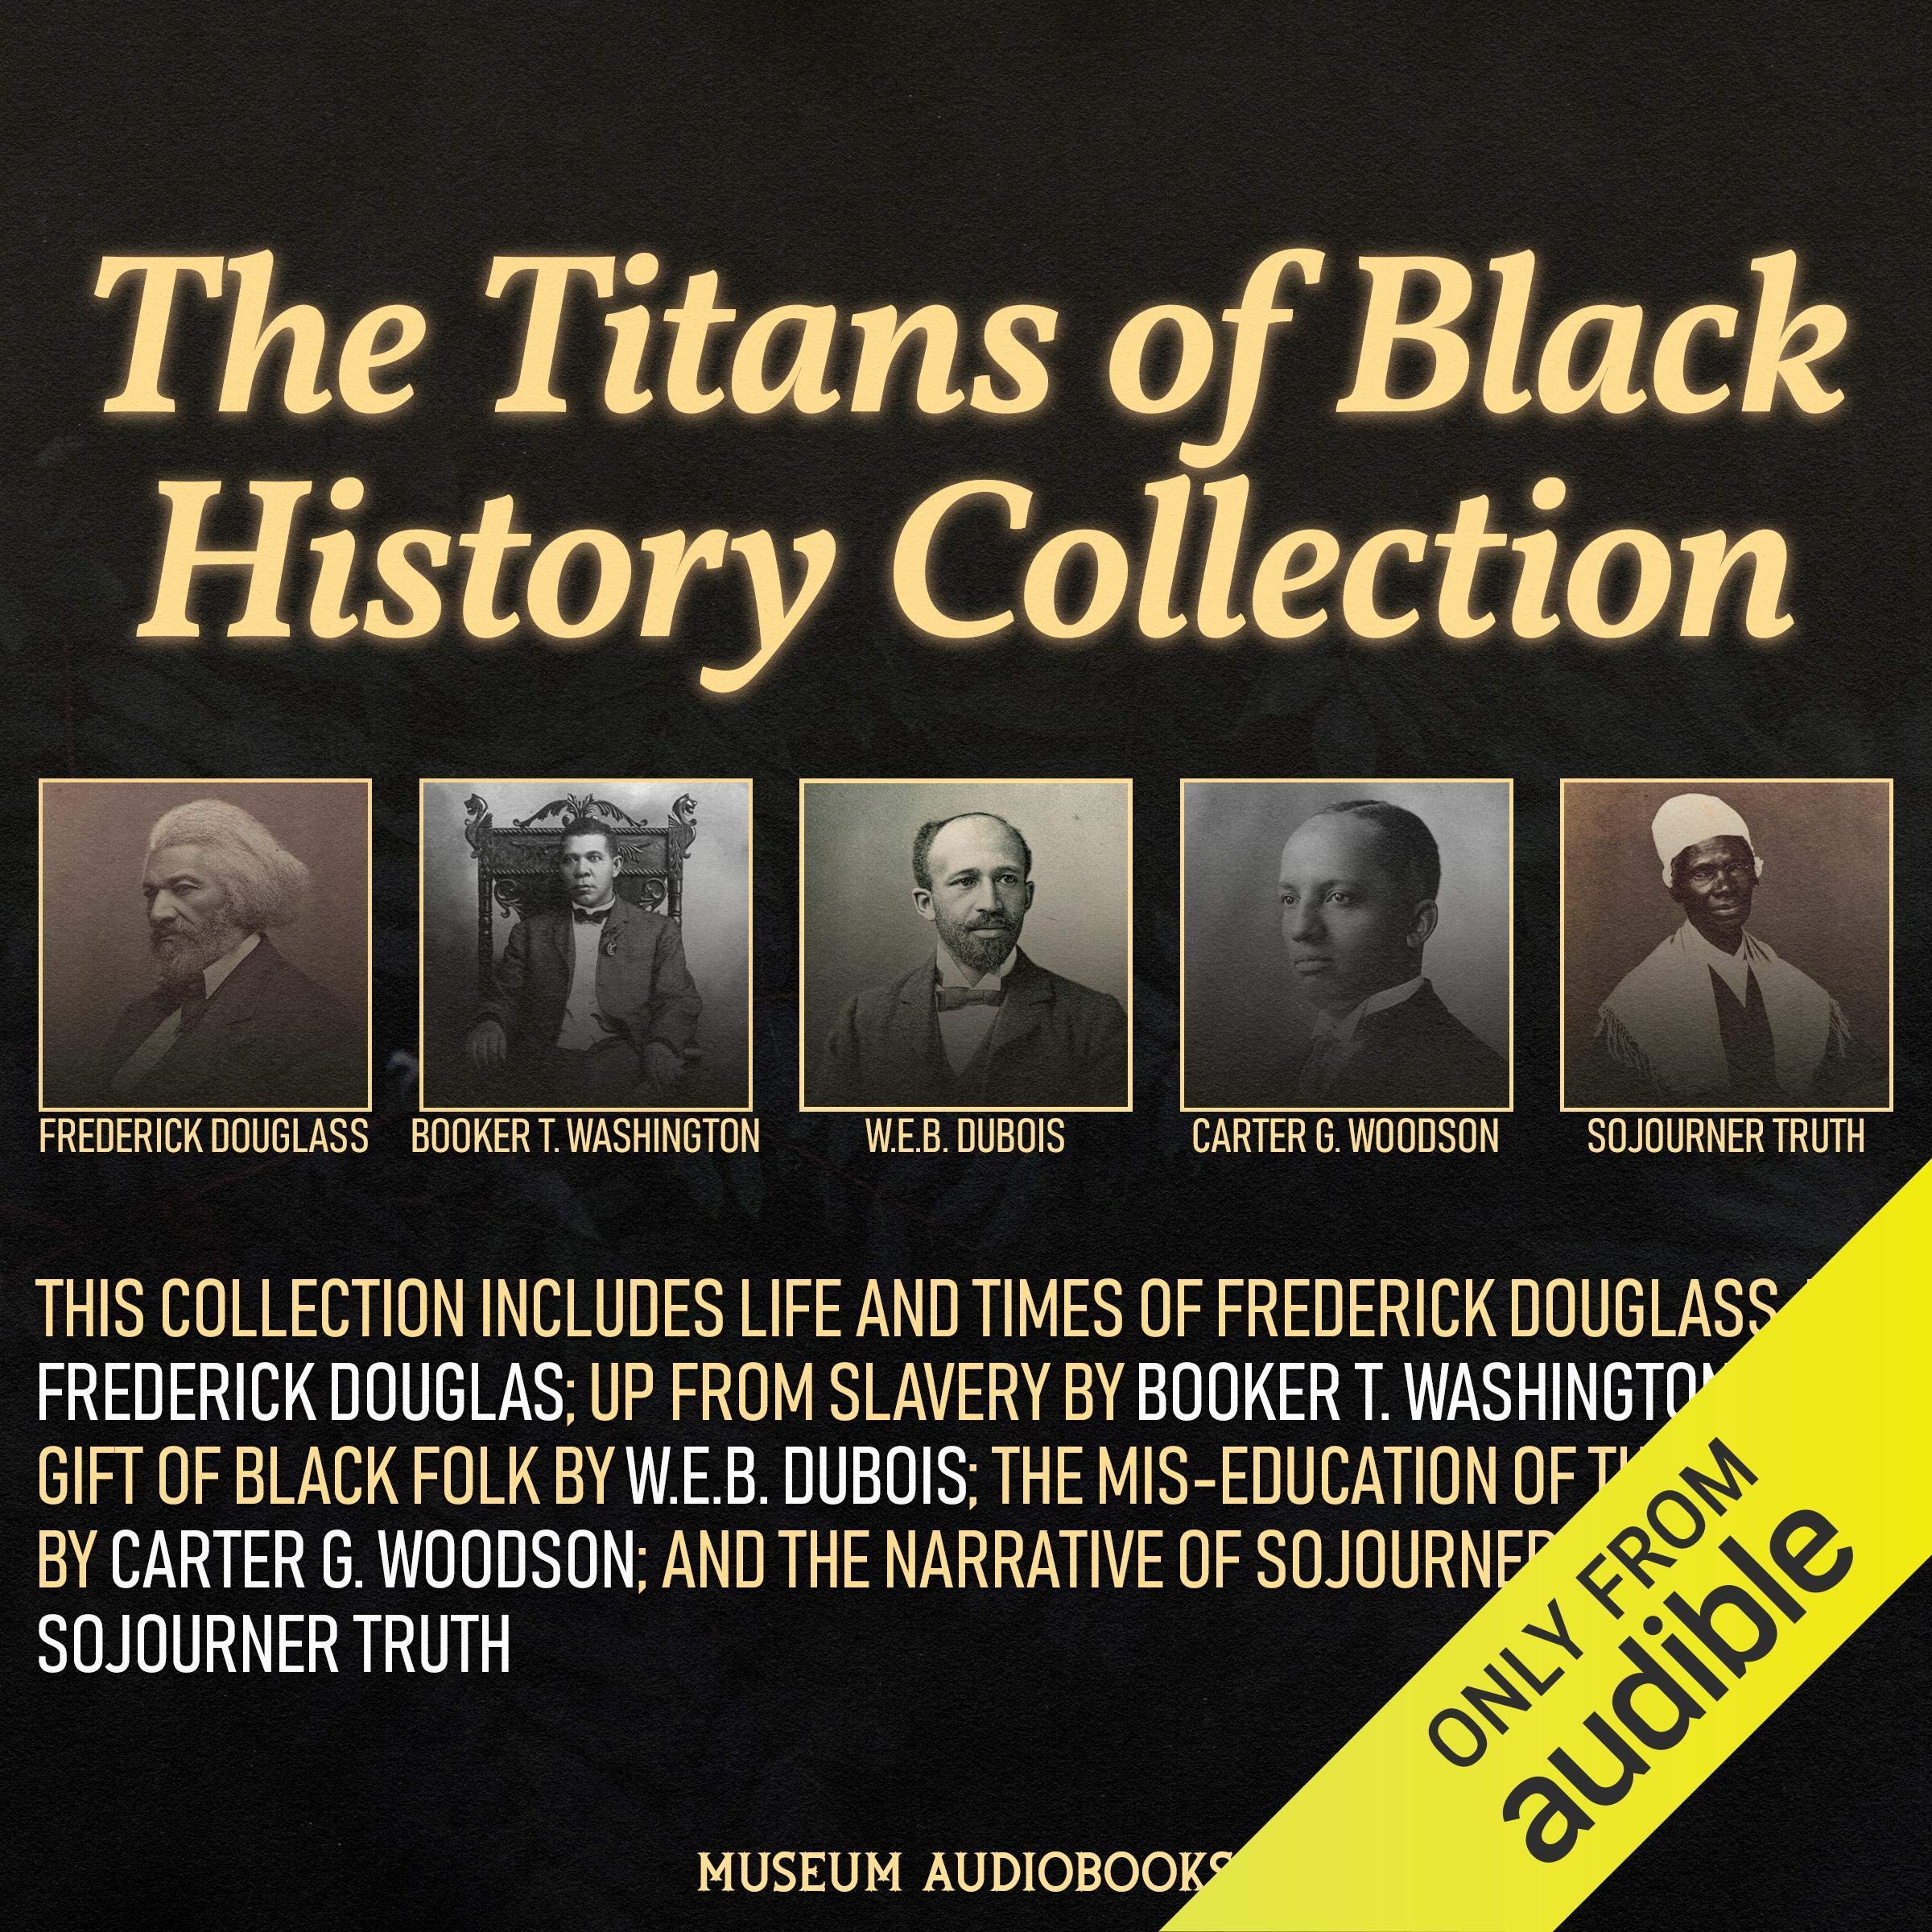 The Titans of Black History Collection: Frederick Douglass, Booker T. Washington, W.E.B. Dubois, Carter G. Woodson, and Sojourner Truth: Life and Times of Frederick Douglass; Up from Slavery; The Gift of Black Folk; The Mis-Education of the Negro; and The